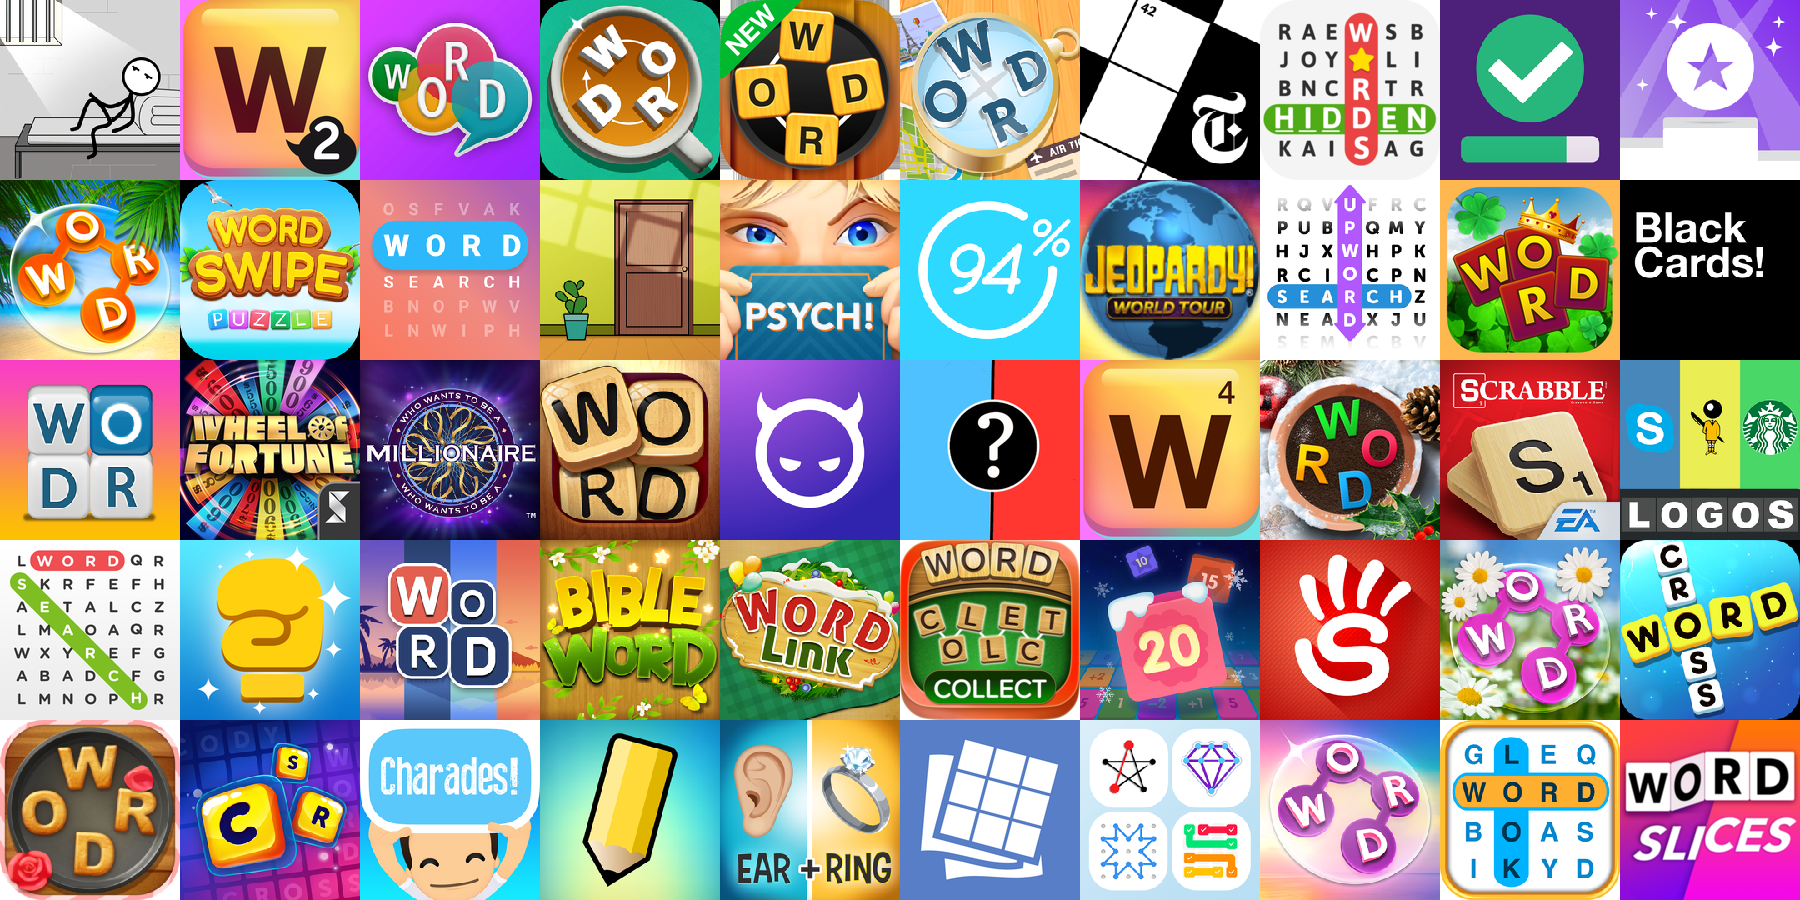 [Infographic] Mobile Games App Icon Trends - ASO Blog